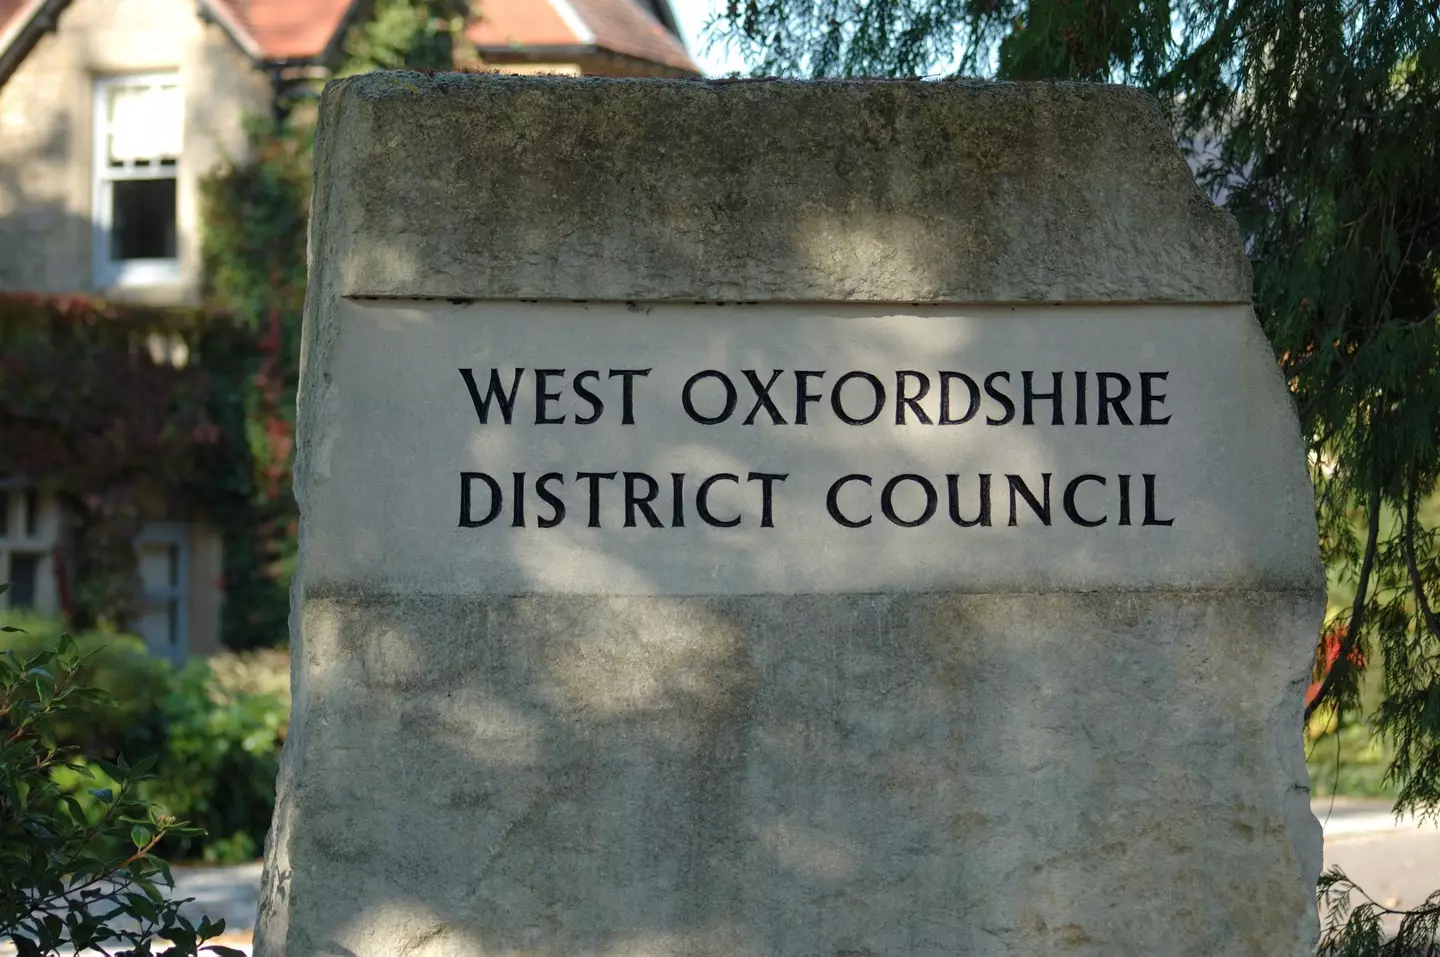 Dean Temple, representing Chadlington on West Oxfordshire District Council, said Clarkson had been treated fairly and 'behaved like a gentleman'.